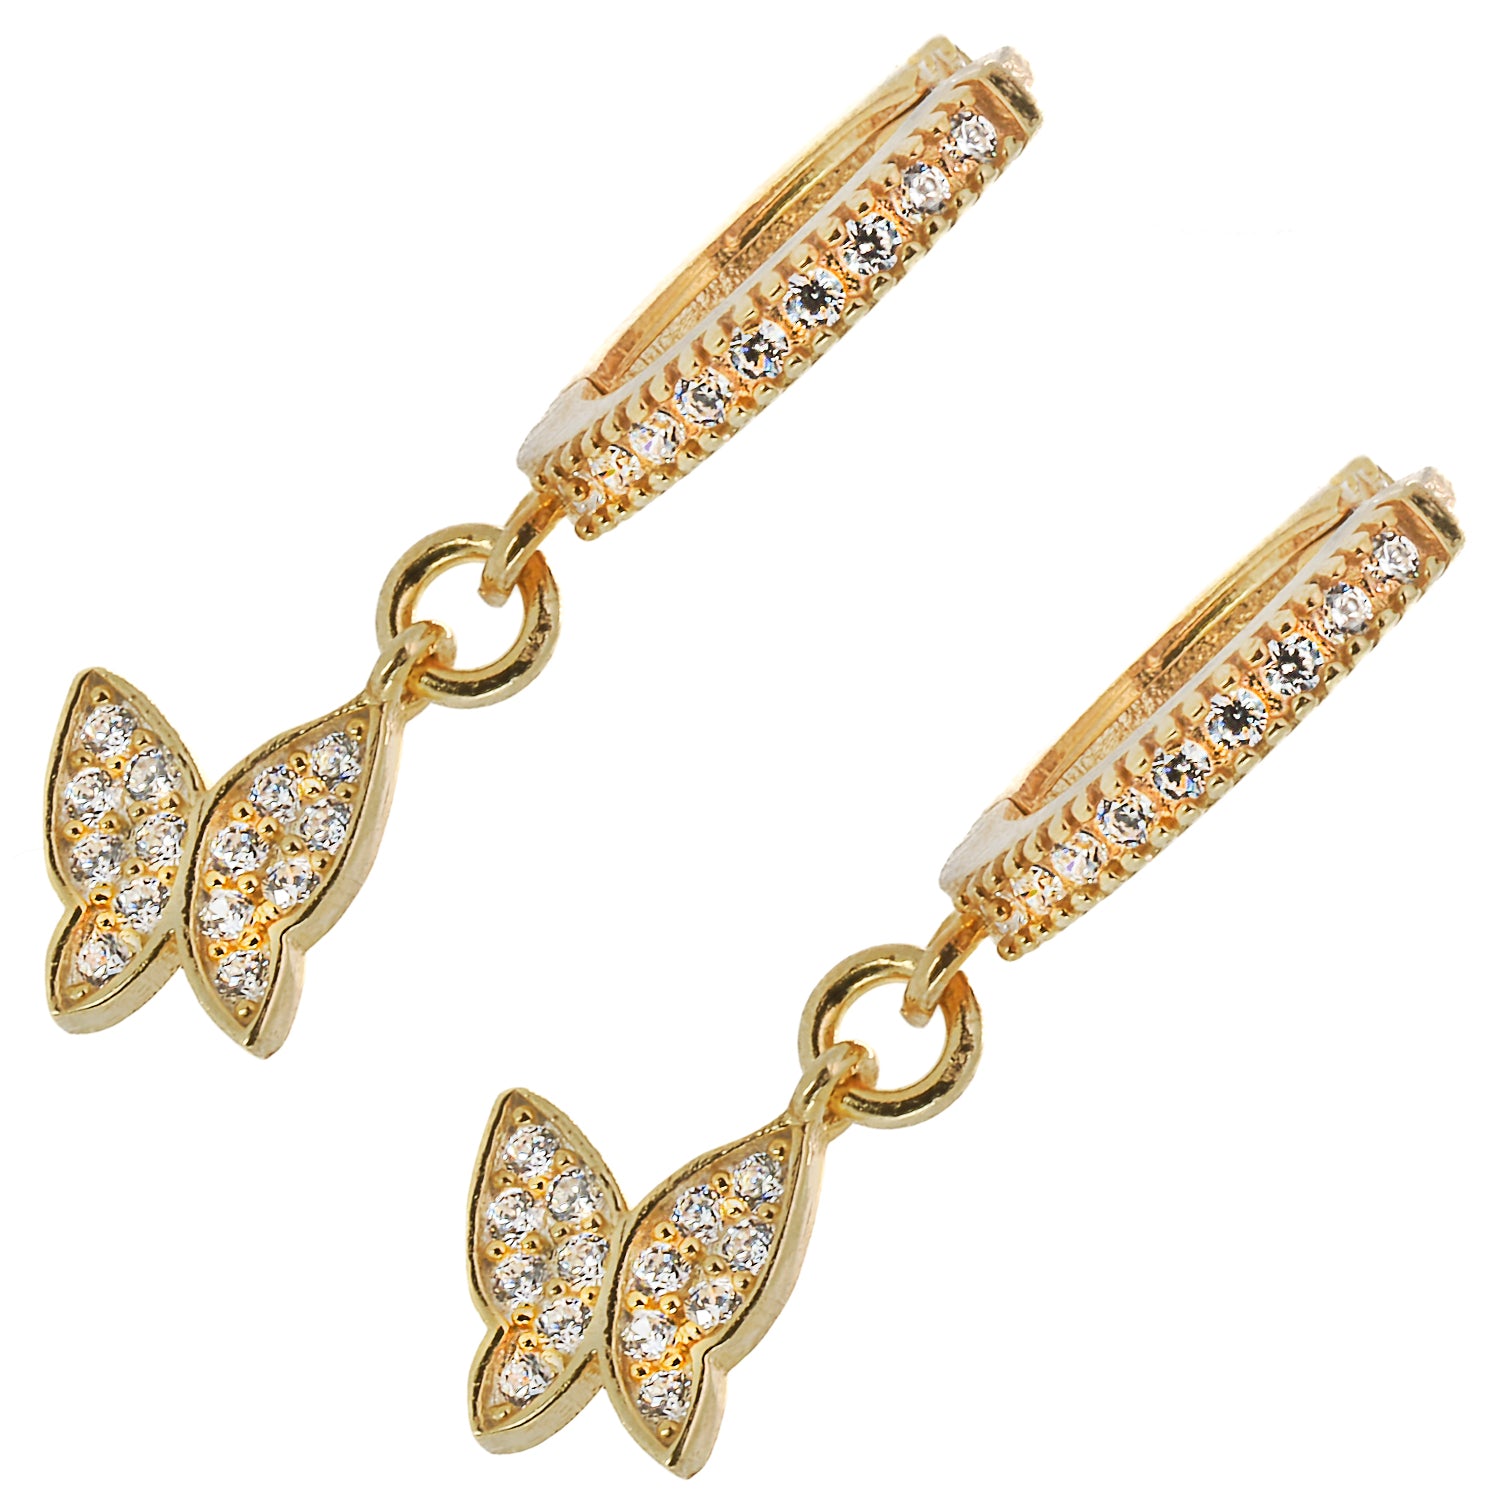 Handmade sterling silver butterfly earrings plated in 18K gold, adorned with sparkling CZ diamonds